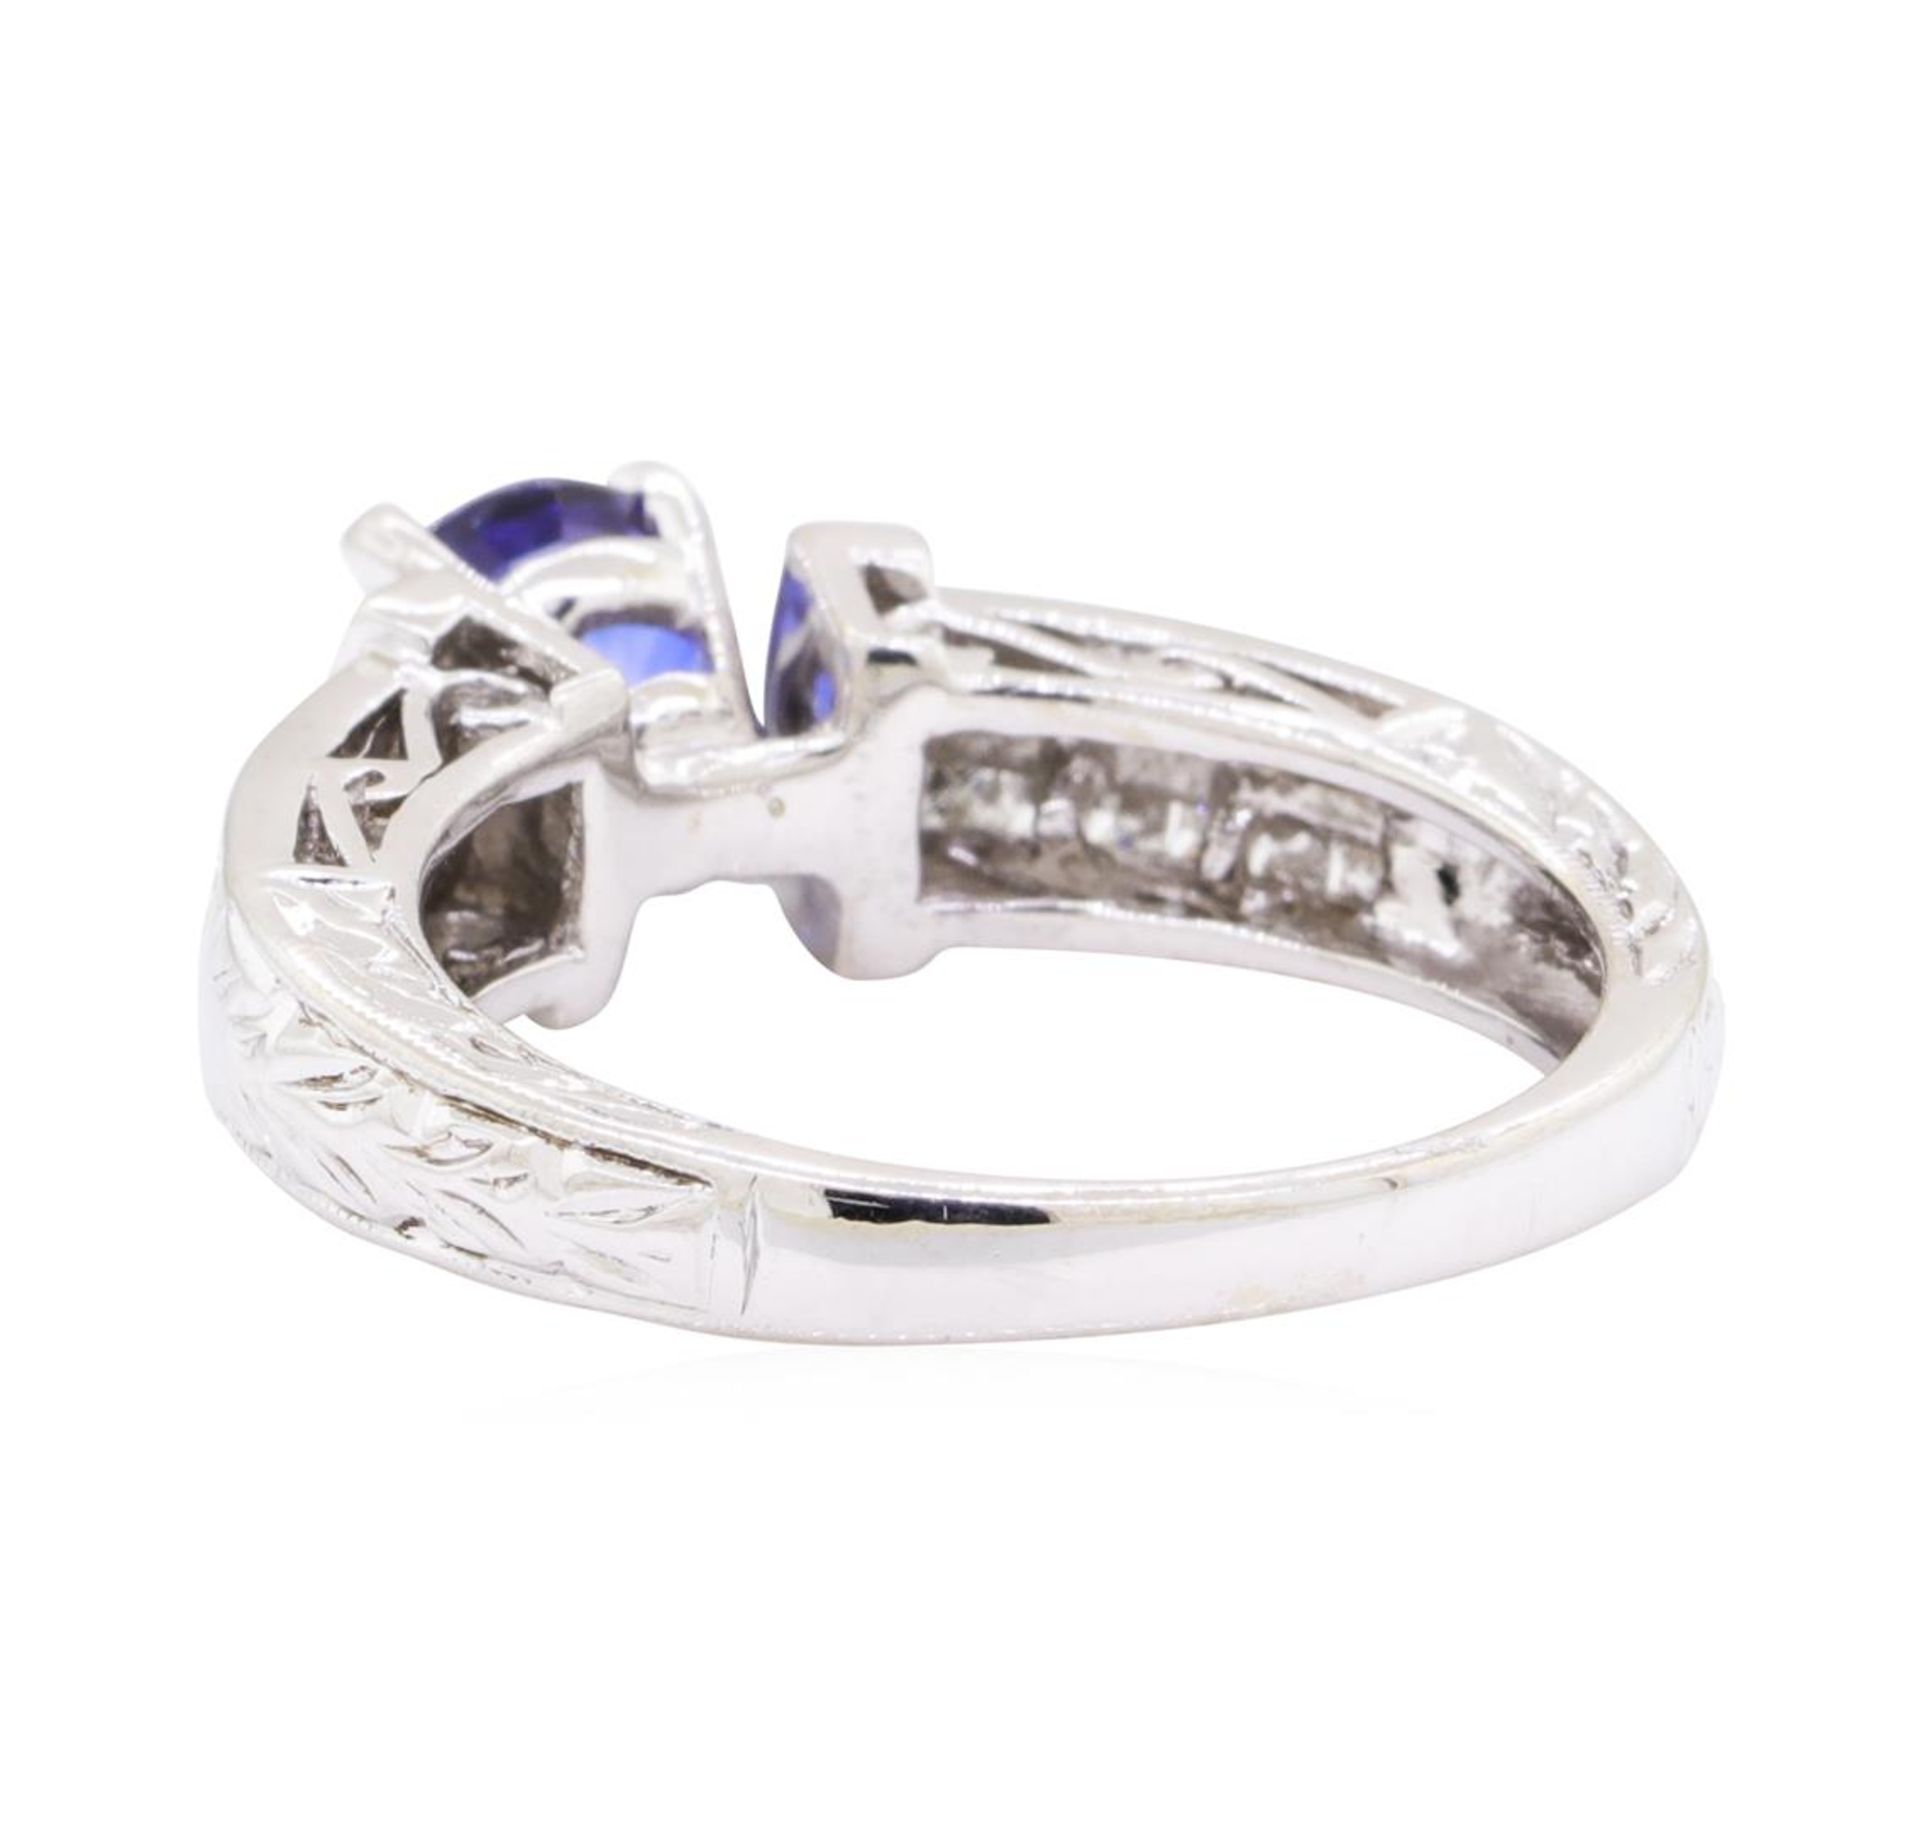 1.36 ctw Sapphire and Diamond Ring - 14KT White Gold - Image 3 of 4